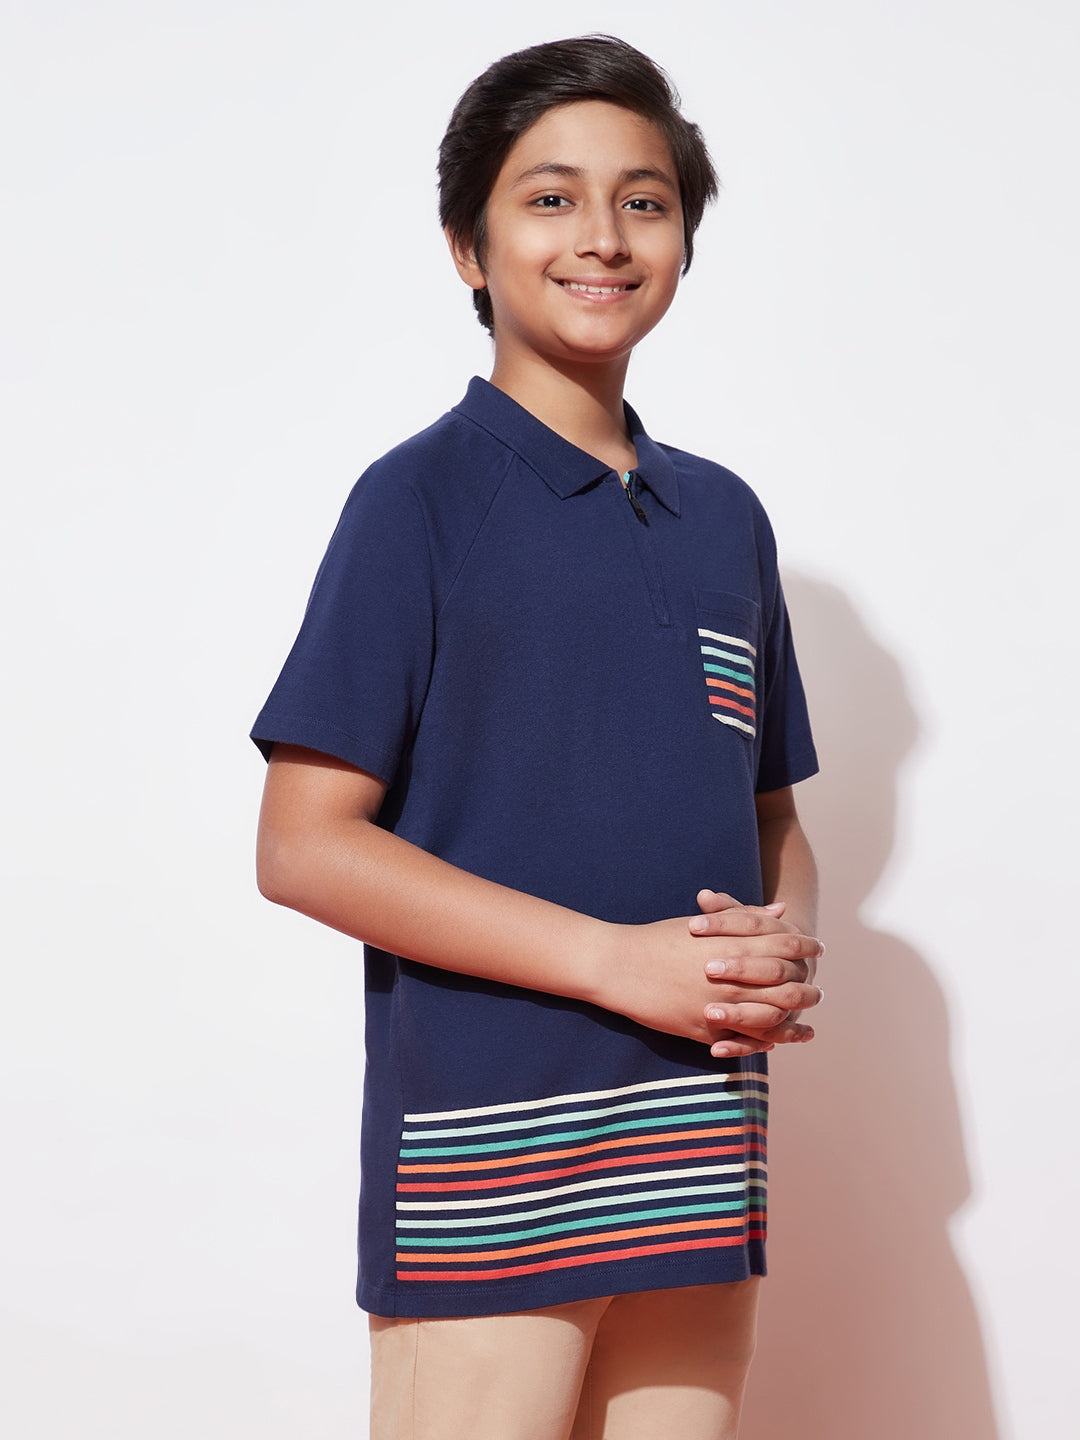 Stretched Polo Zip For Teen Boys